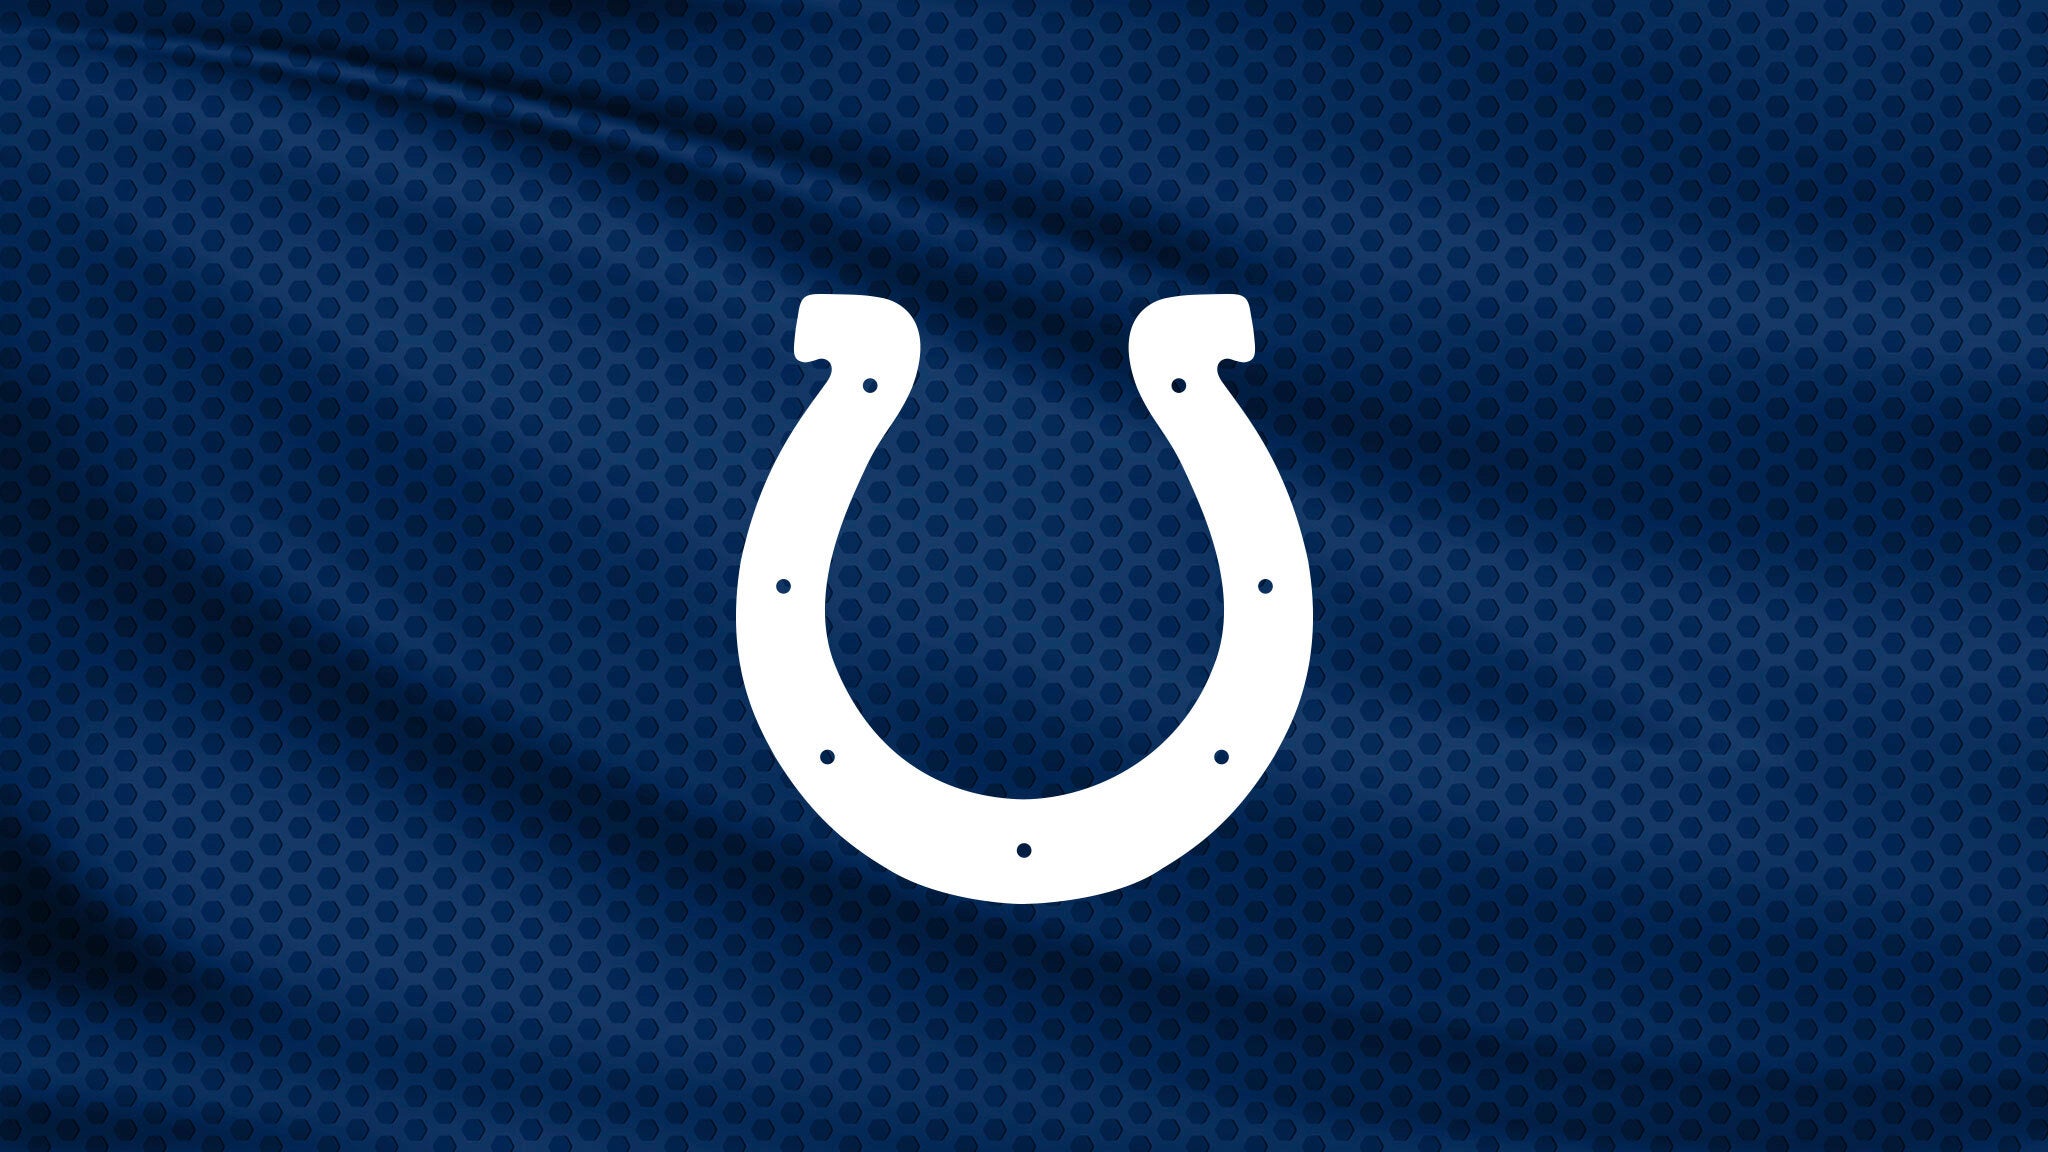 Indianapolis Colts vs. Chicago Bears hero